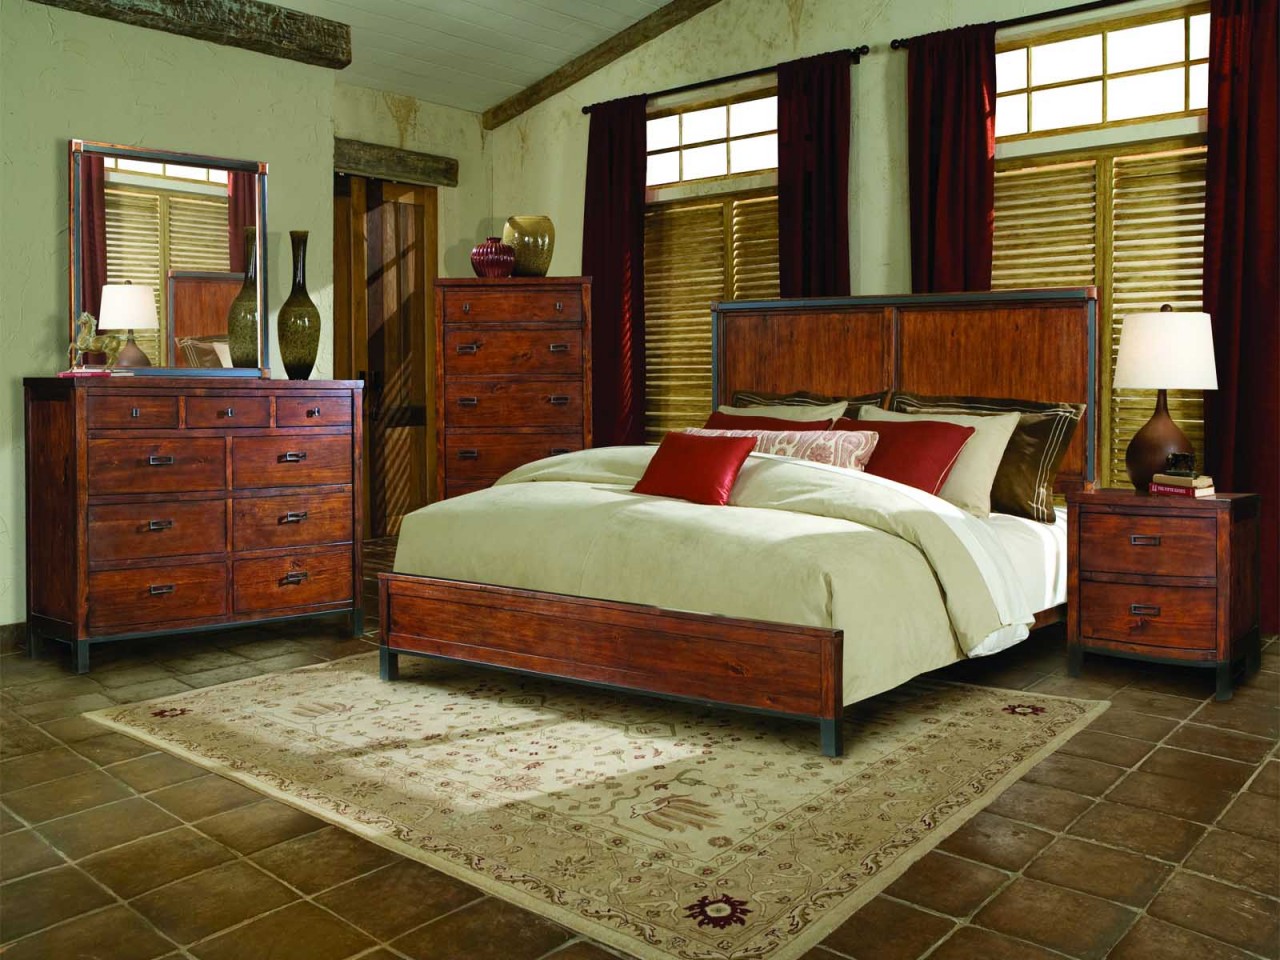 Chic Brown Floor Shabby Chic Brown Interior Tile Floor For Rustic Bedroom Furniture With Dashing Window Treatments Bedroom Breathtaking Rustic Bedroom Furniture Sets With Warm Impression